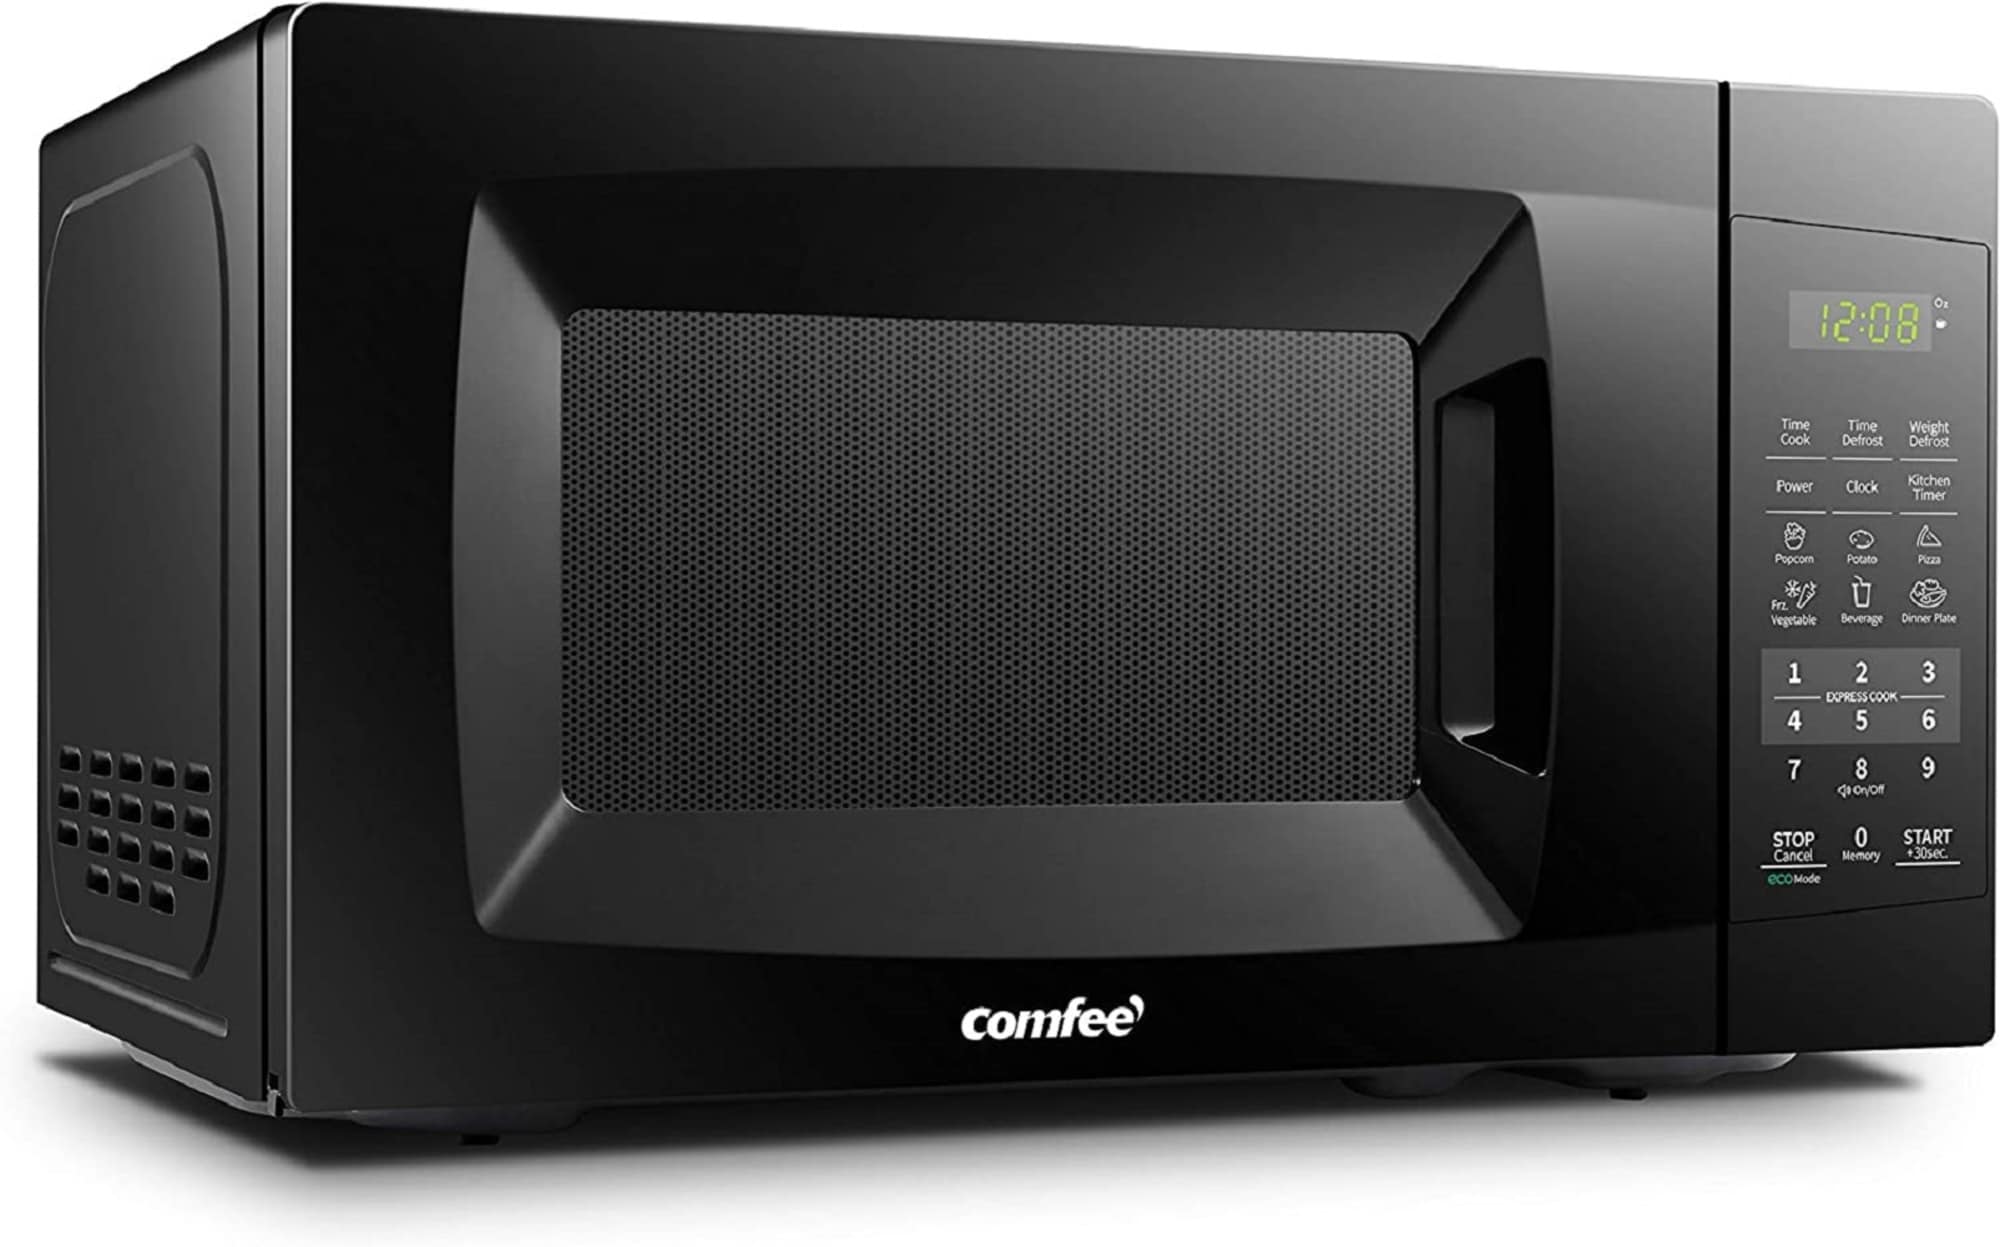 Comfee Microwave Ovens • compare today & find prices »